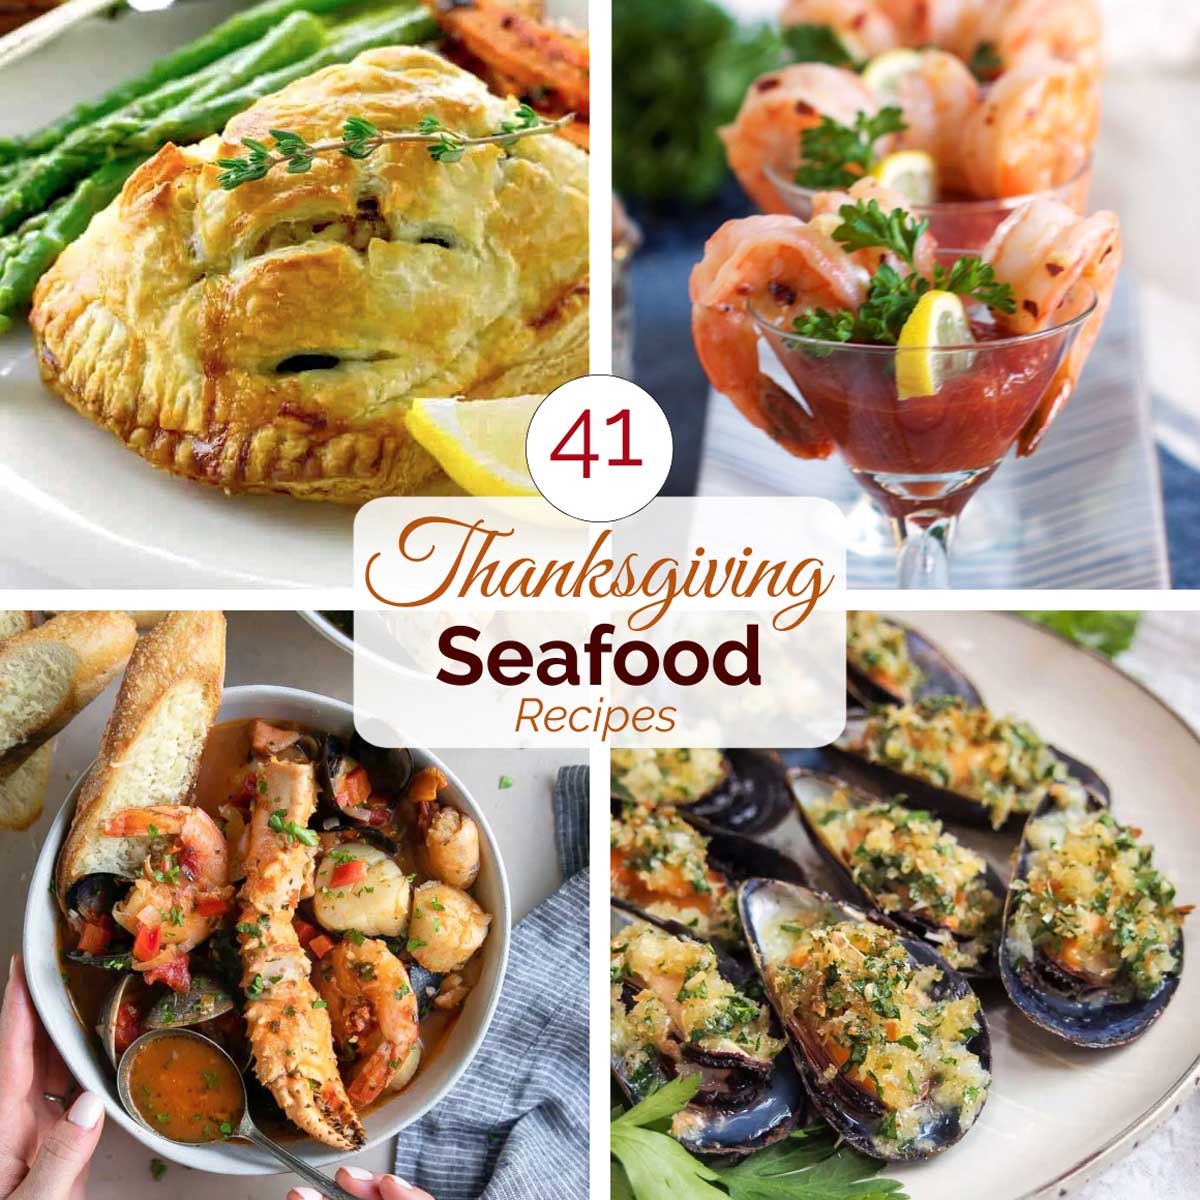 Square image with 4 recipe photos and text overlay "Pinnable graphic showing 4 recipes with text "41 Thanksgiving Seafood Recipes".